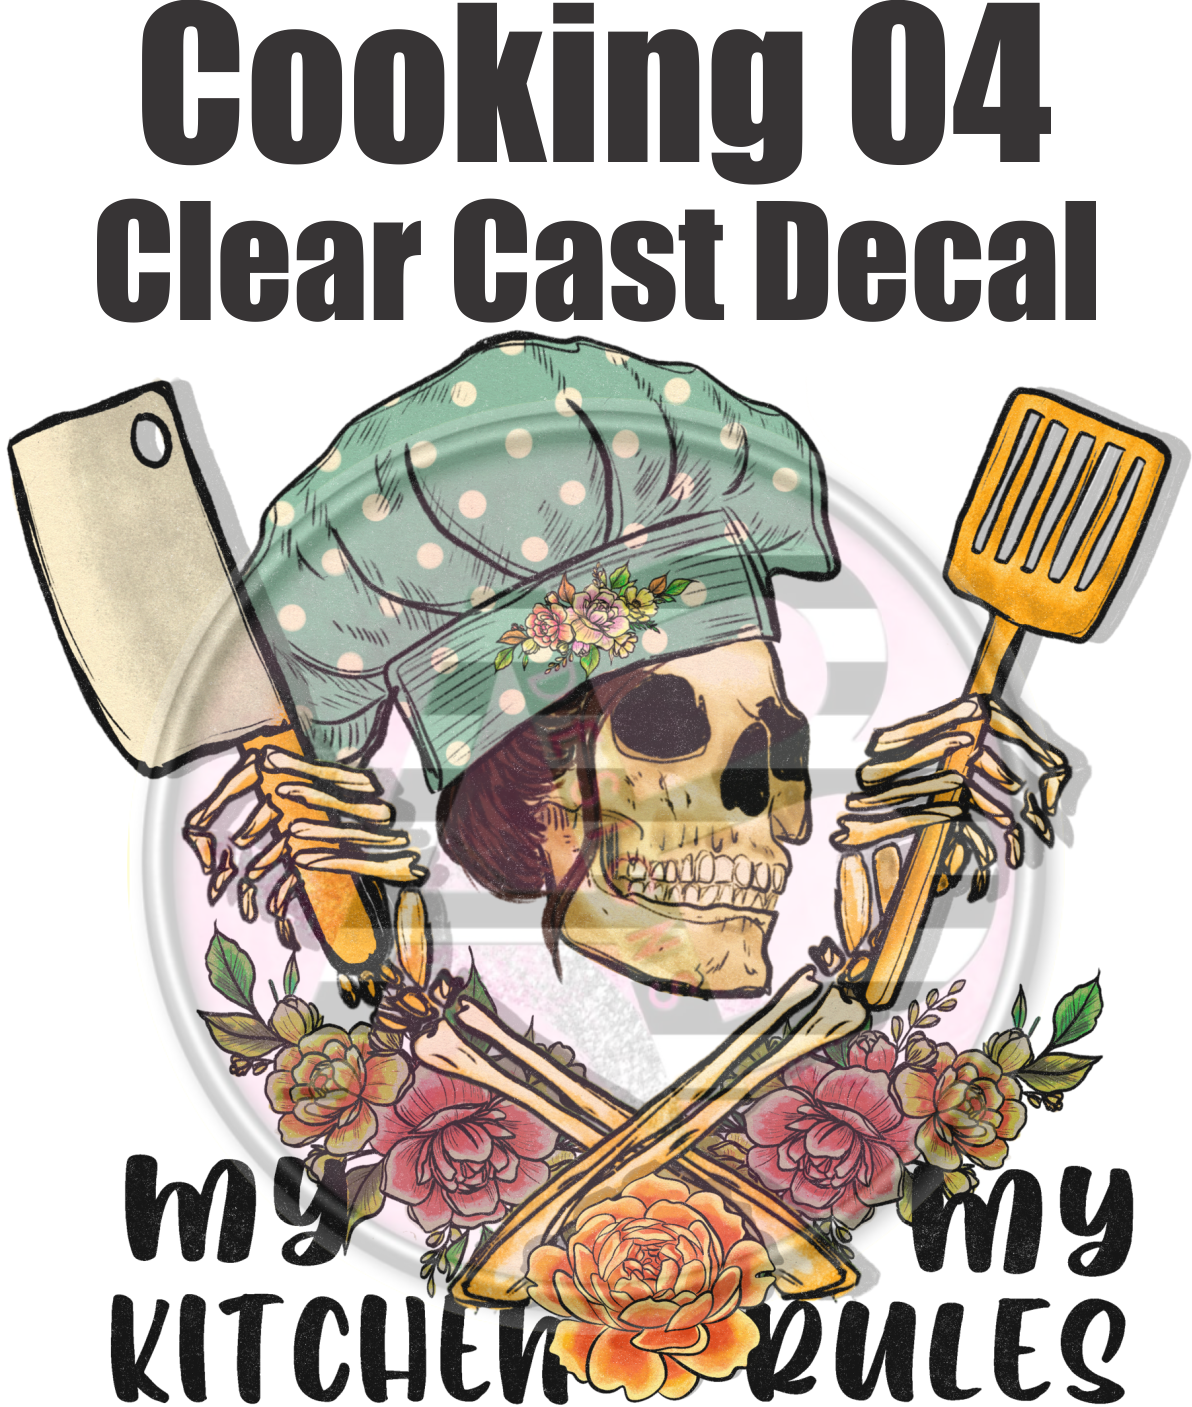 Cooking 04 - Clear Cast Decal - 152